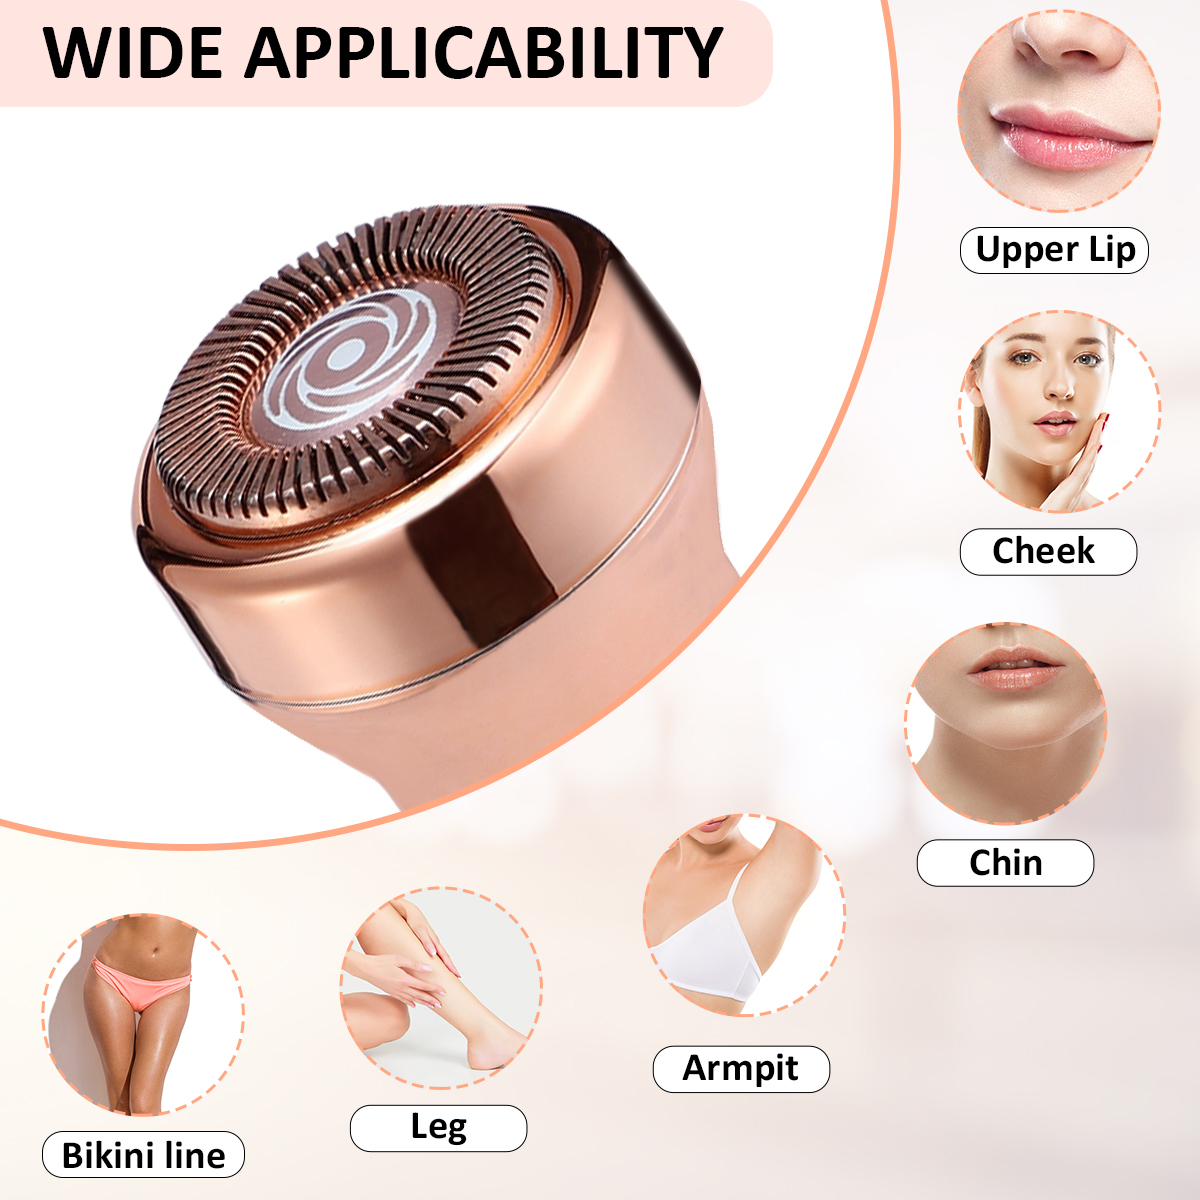 Hapord Eyebrow Hair Remover Hassle-Free Portable Finishing Touch Flawless Brows Removal Razor With Light Battery Included